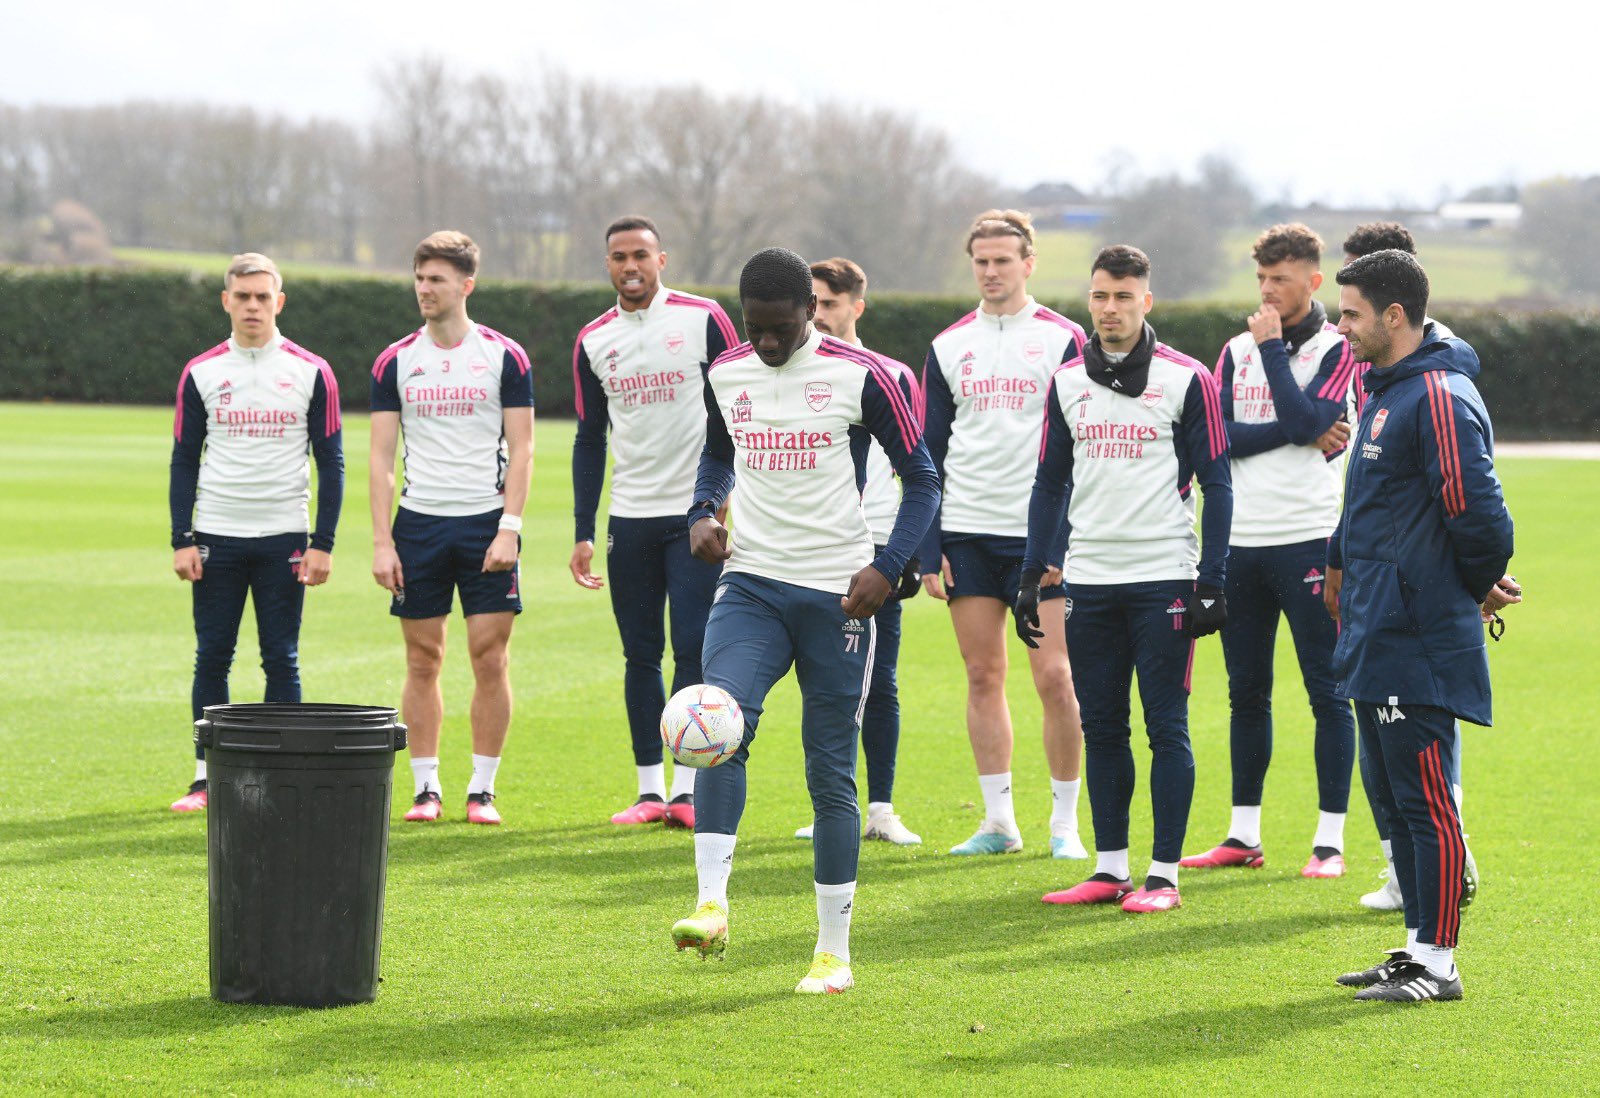 Ghana's Charles Sagoe Jr delighted to train with Arsenal first team ahead of Crystal Palace meeting